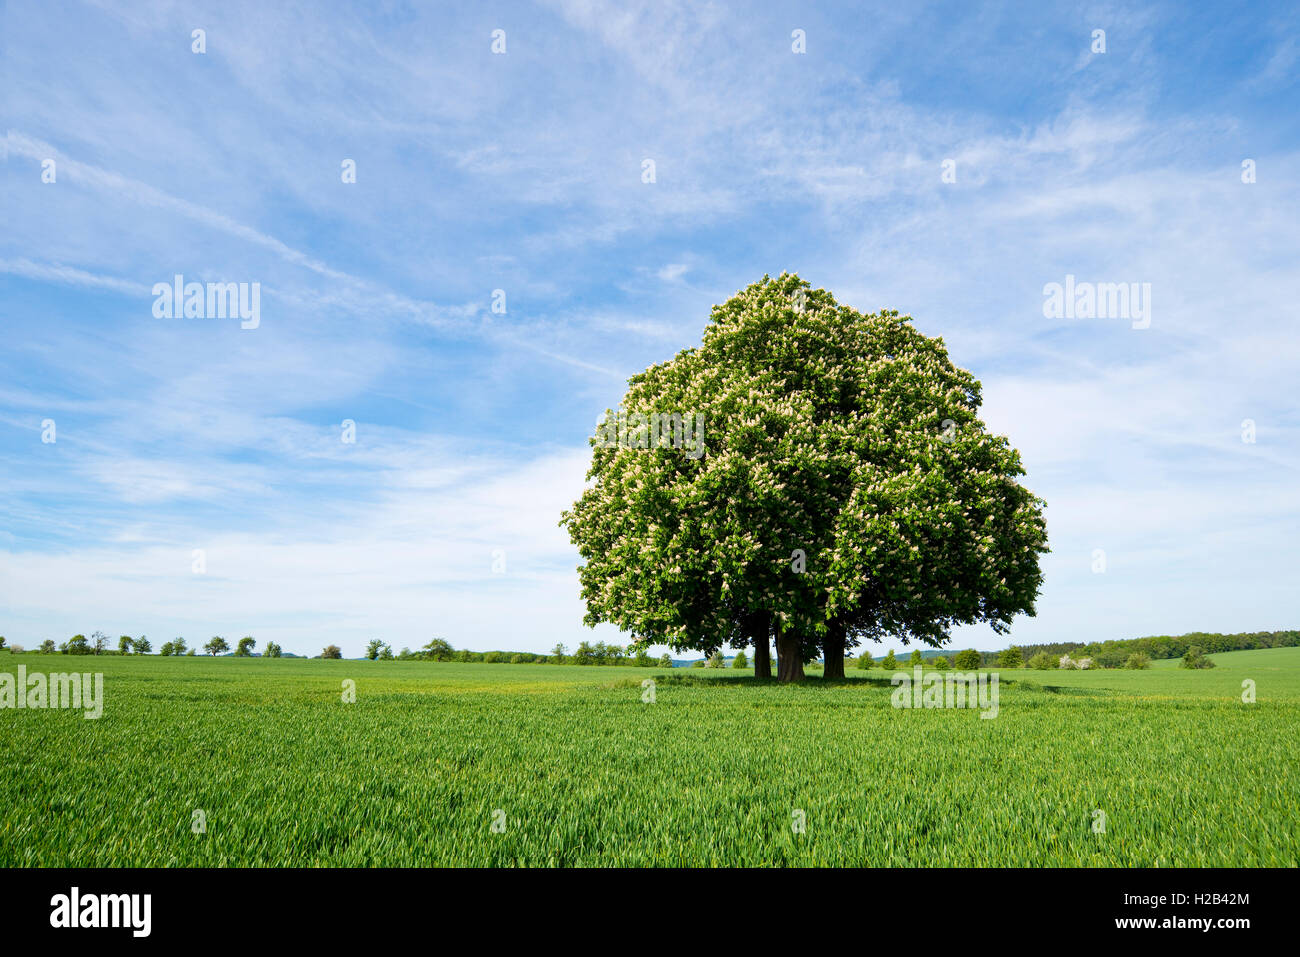 Horse-chestnut or conker tree (Aesculus hippocastanum) flowering, group of trees in grain field, Thuringia, Germany Stock Photo